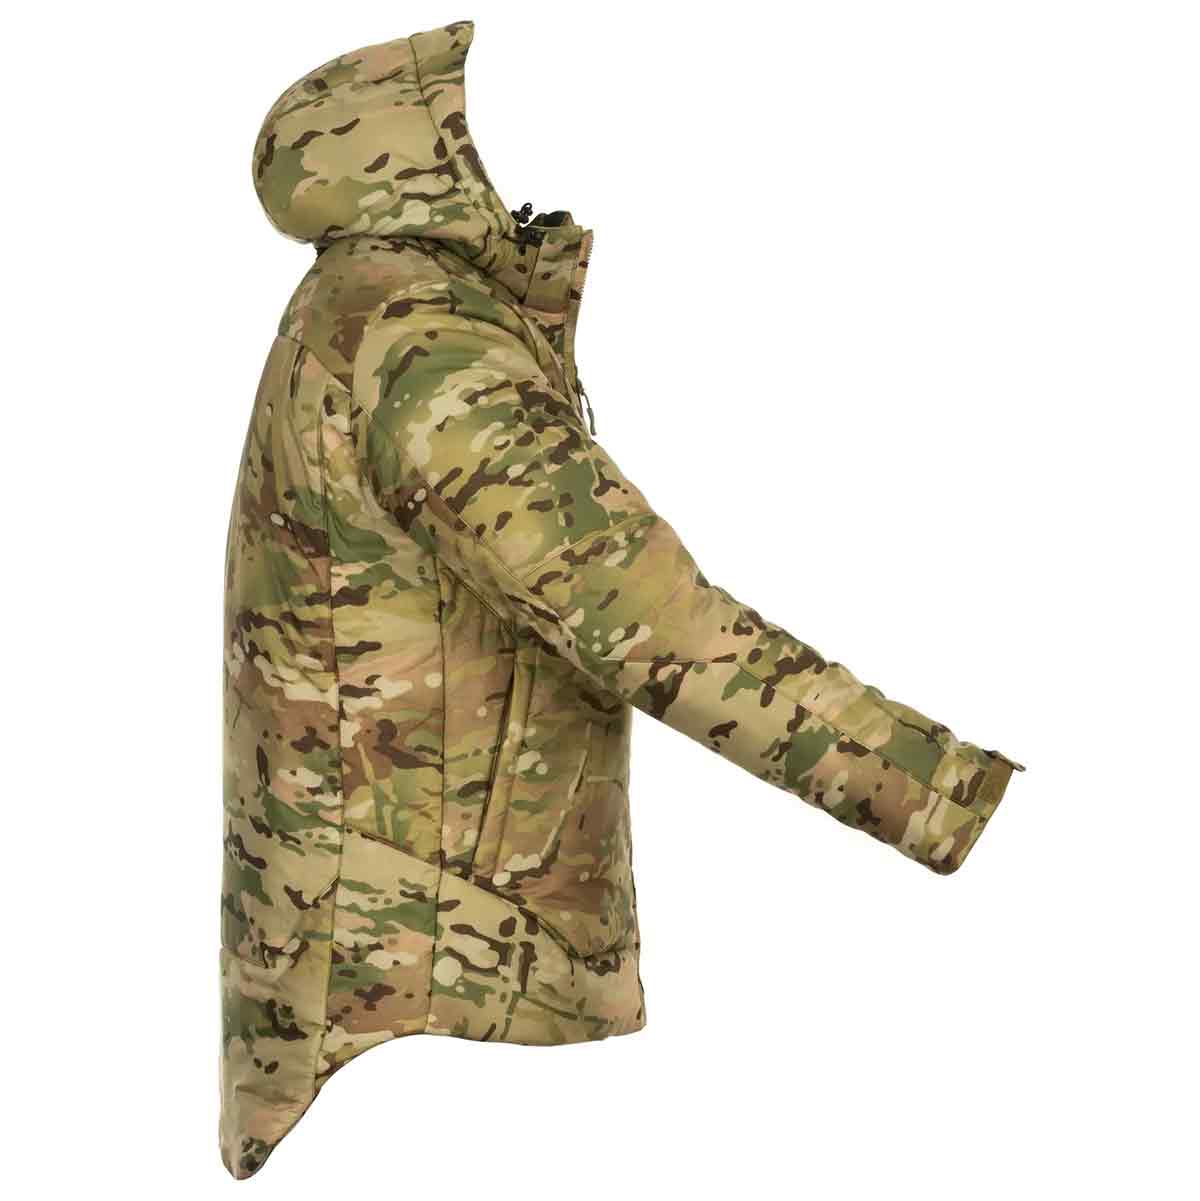 MultiCam Jackets for Extreme Cold Weather